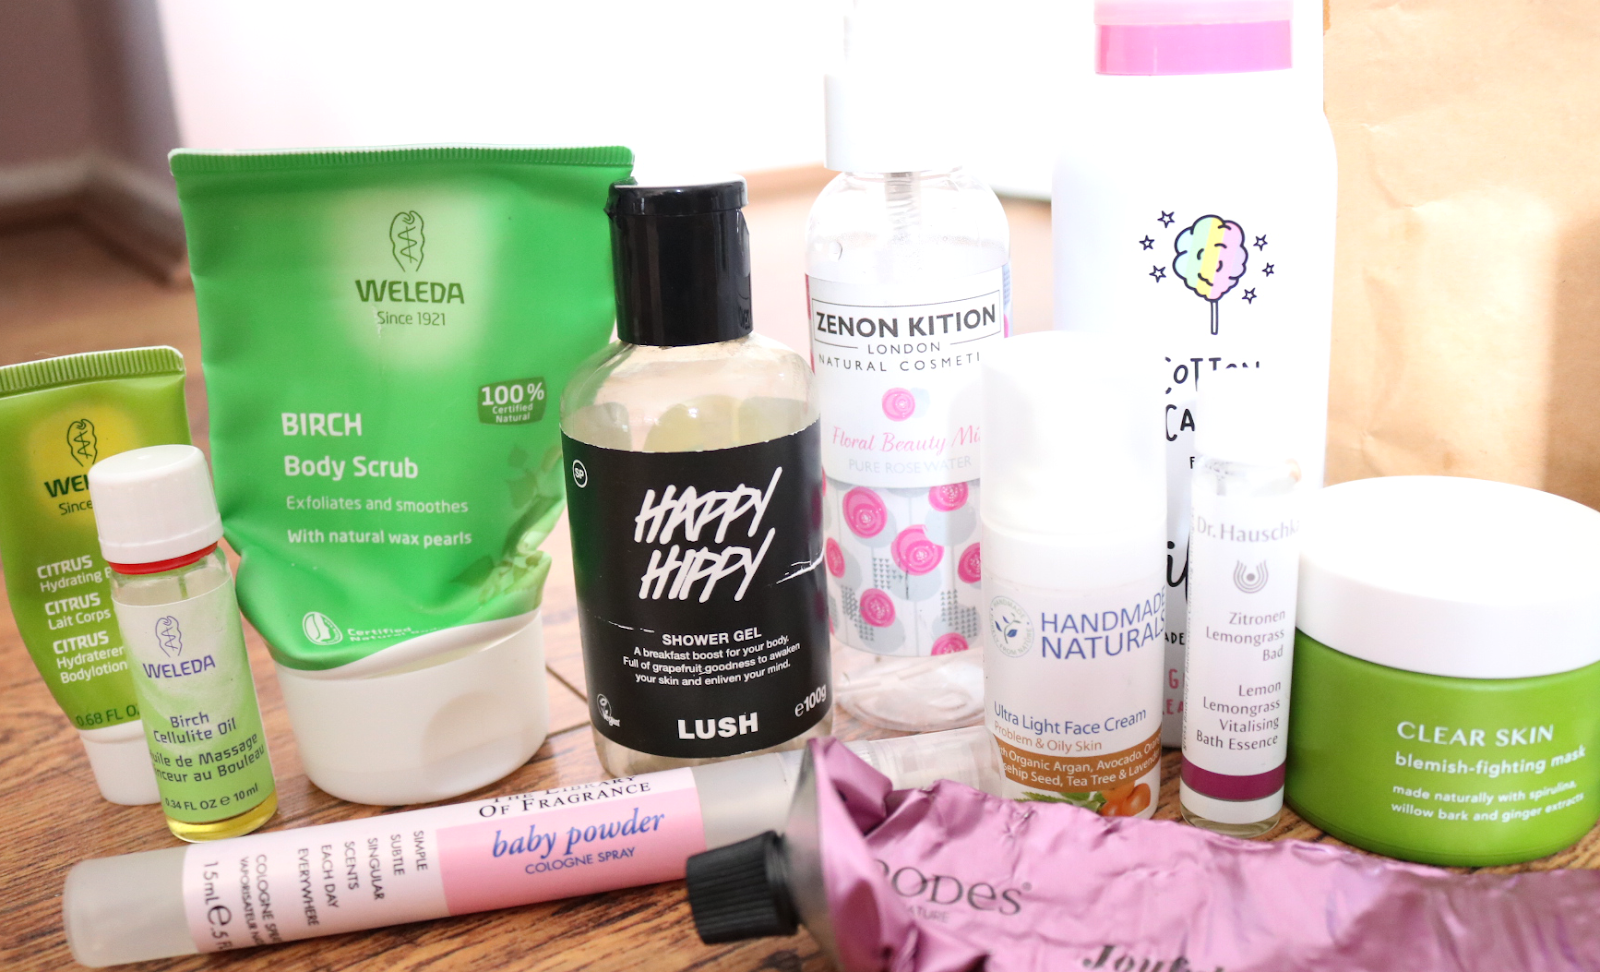 June & July Empties: Products That I've Used Up